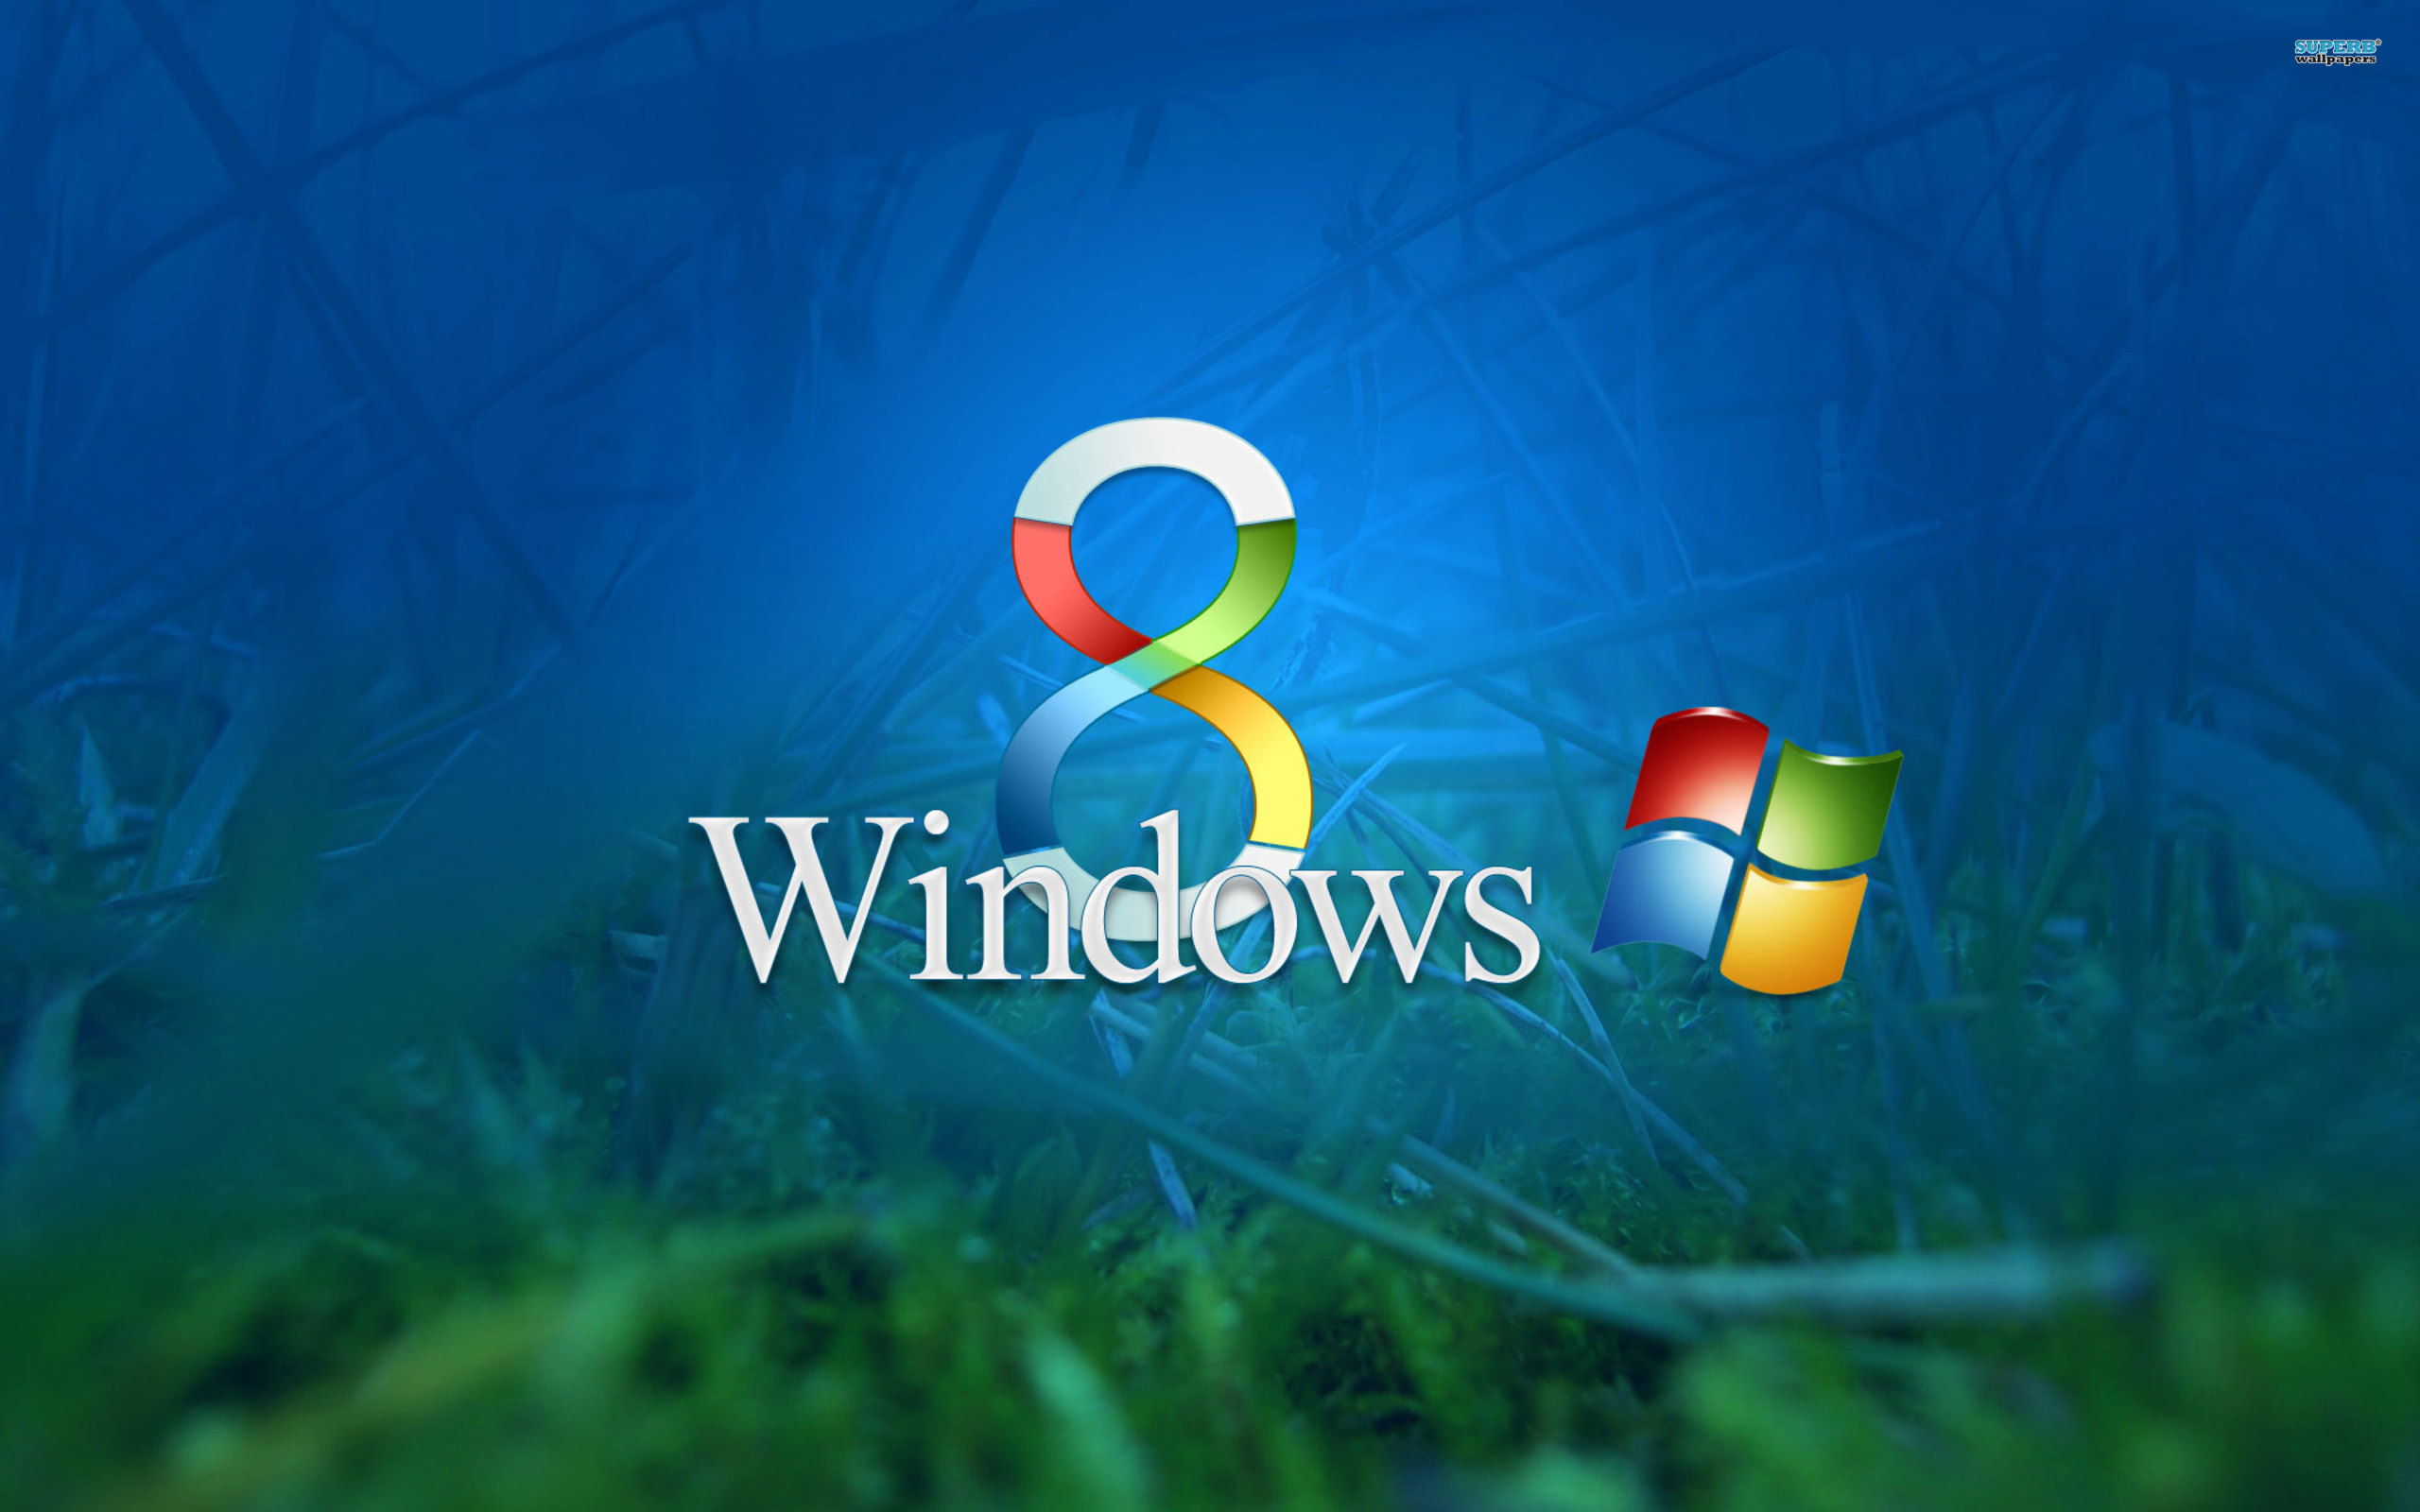 windows, windows 8, technology, microsoft for android